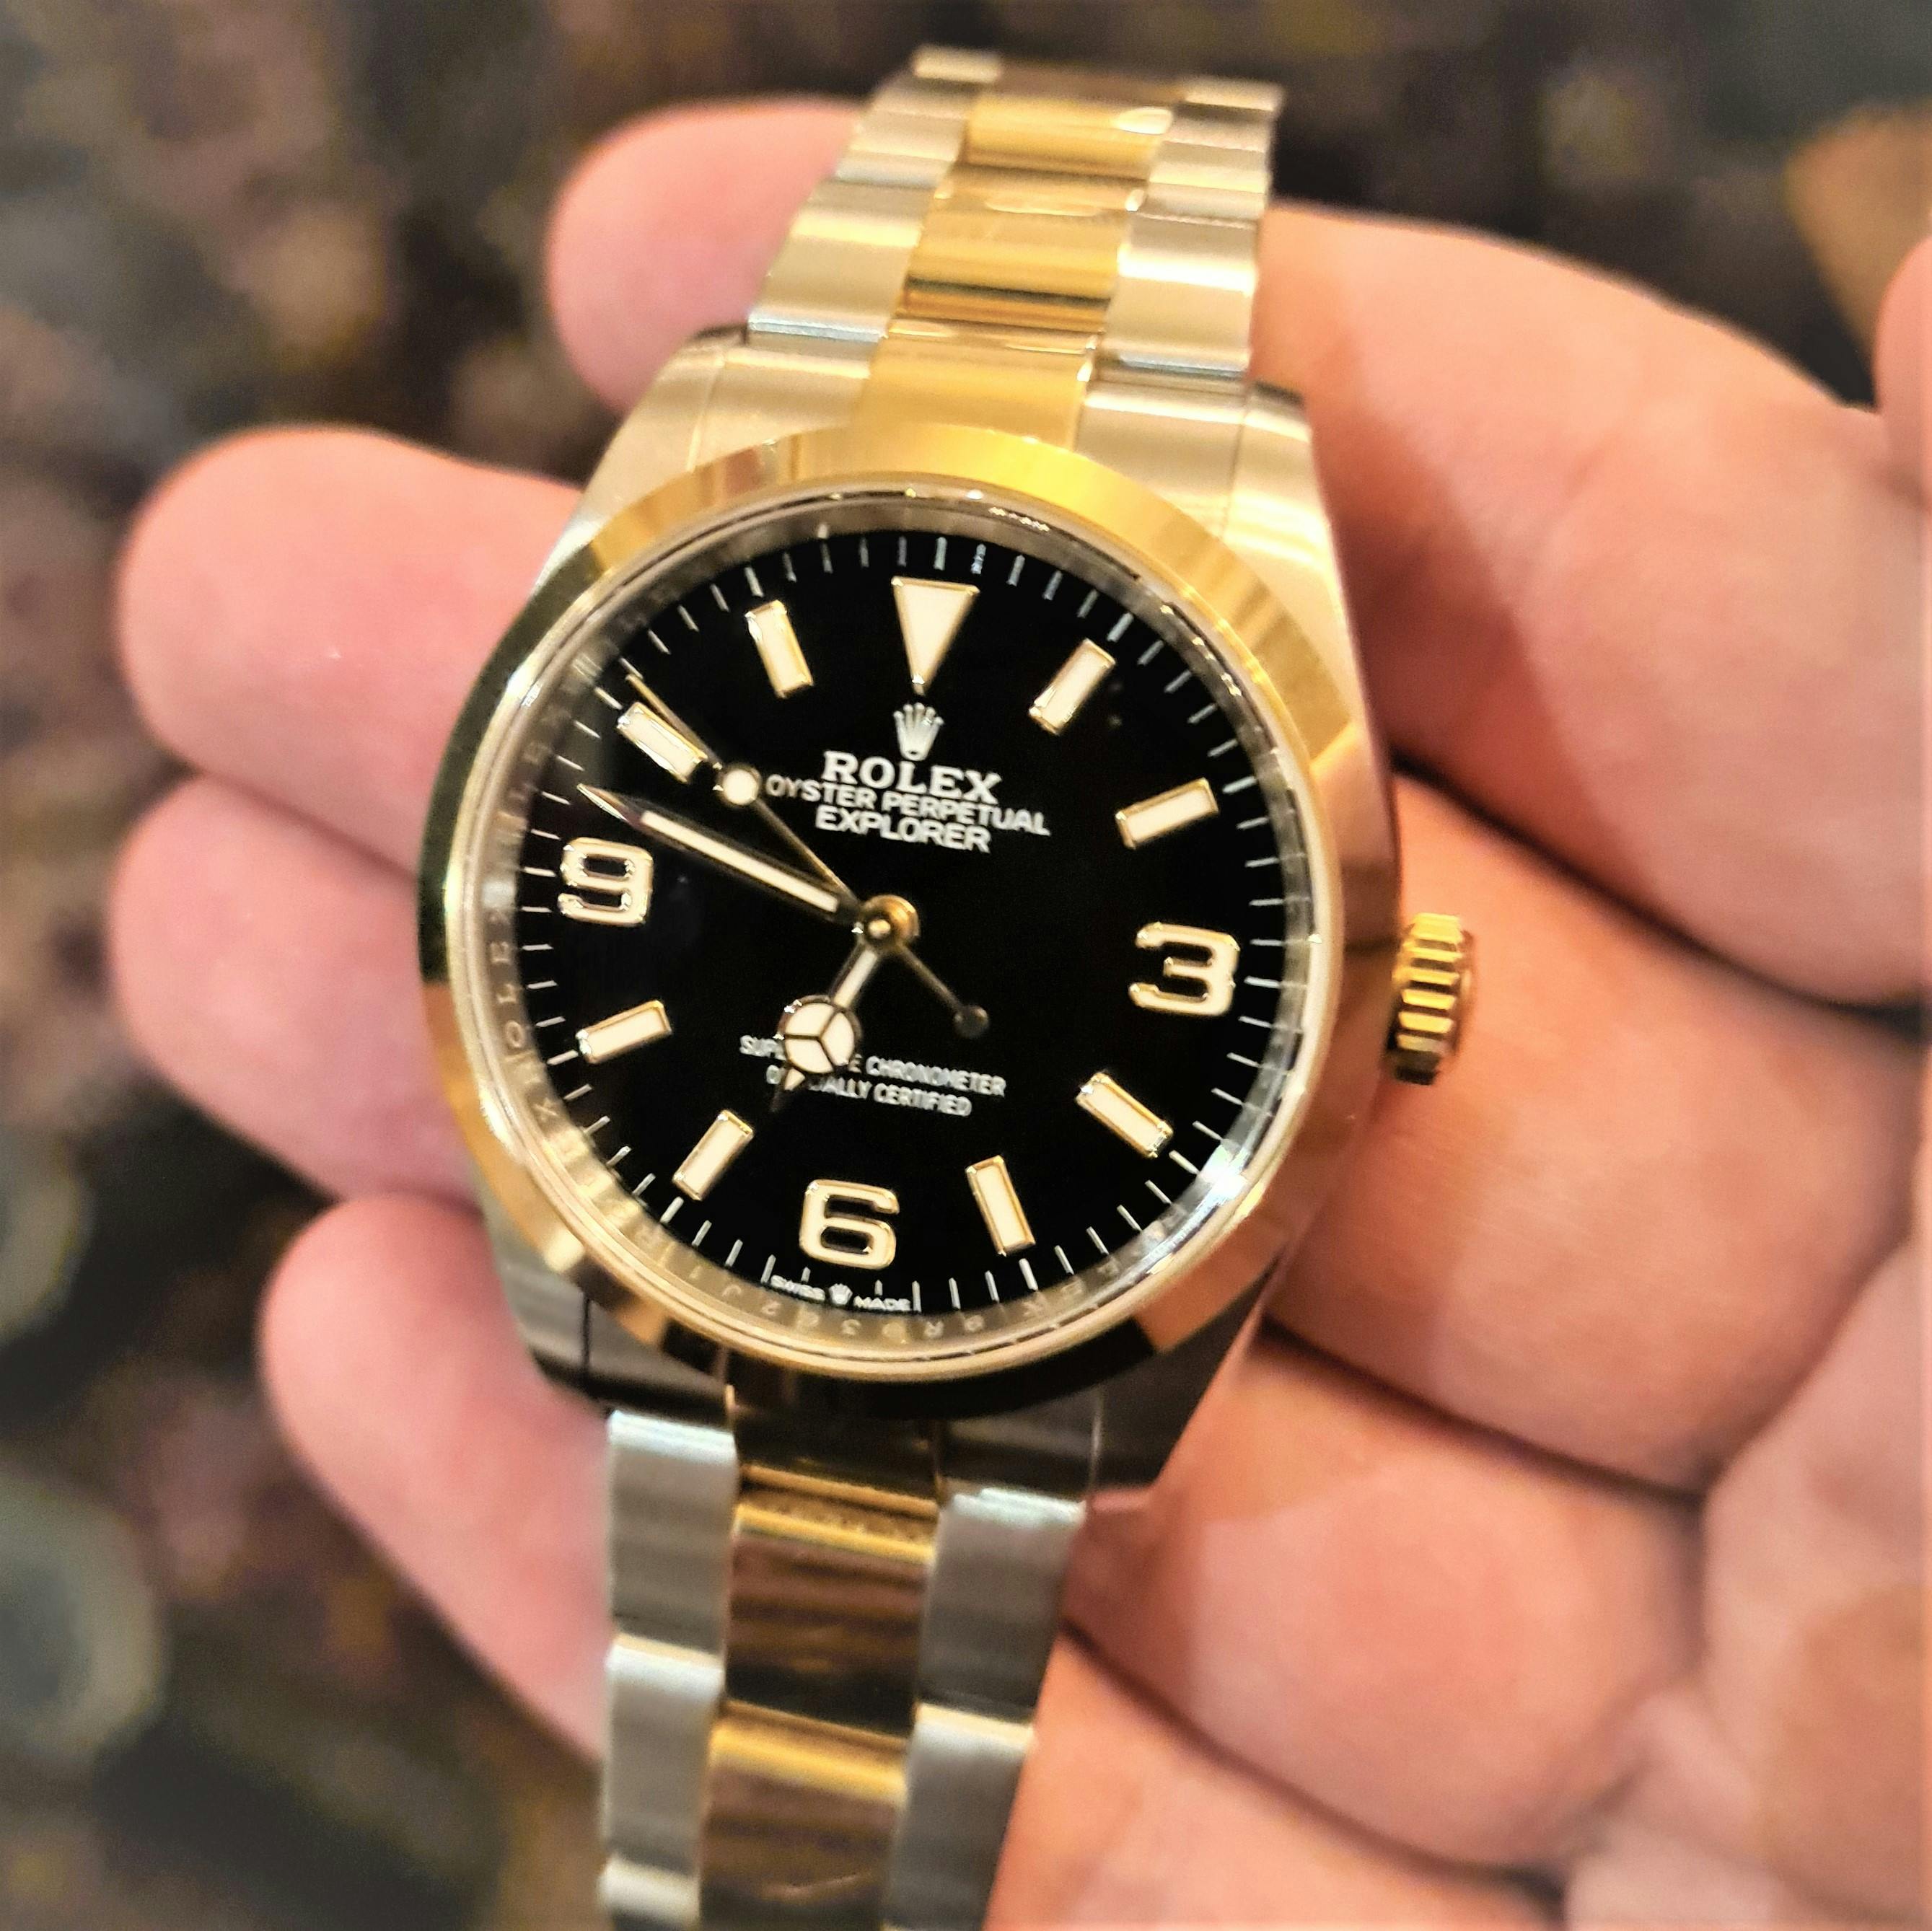 A modern Rolex Explorer in Steel and Gold. This watch is 36mm, so a perfect size for Men or Women